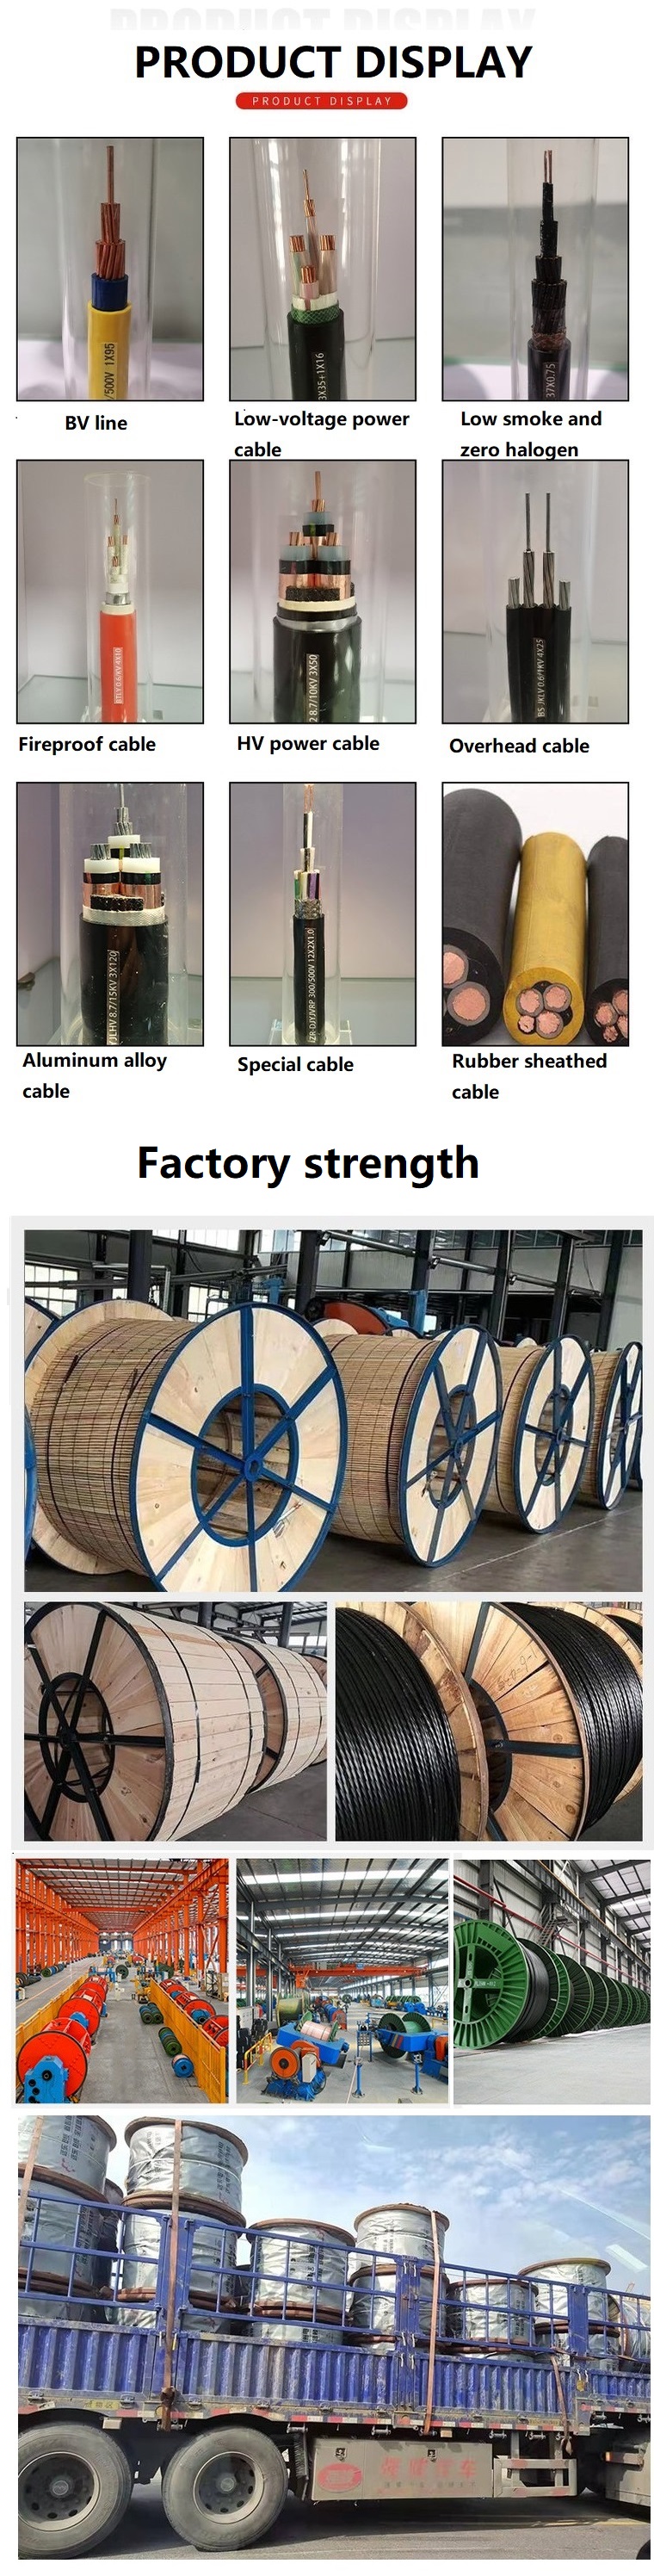 Various Types Of Wires And Cables